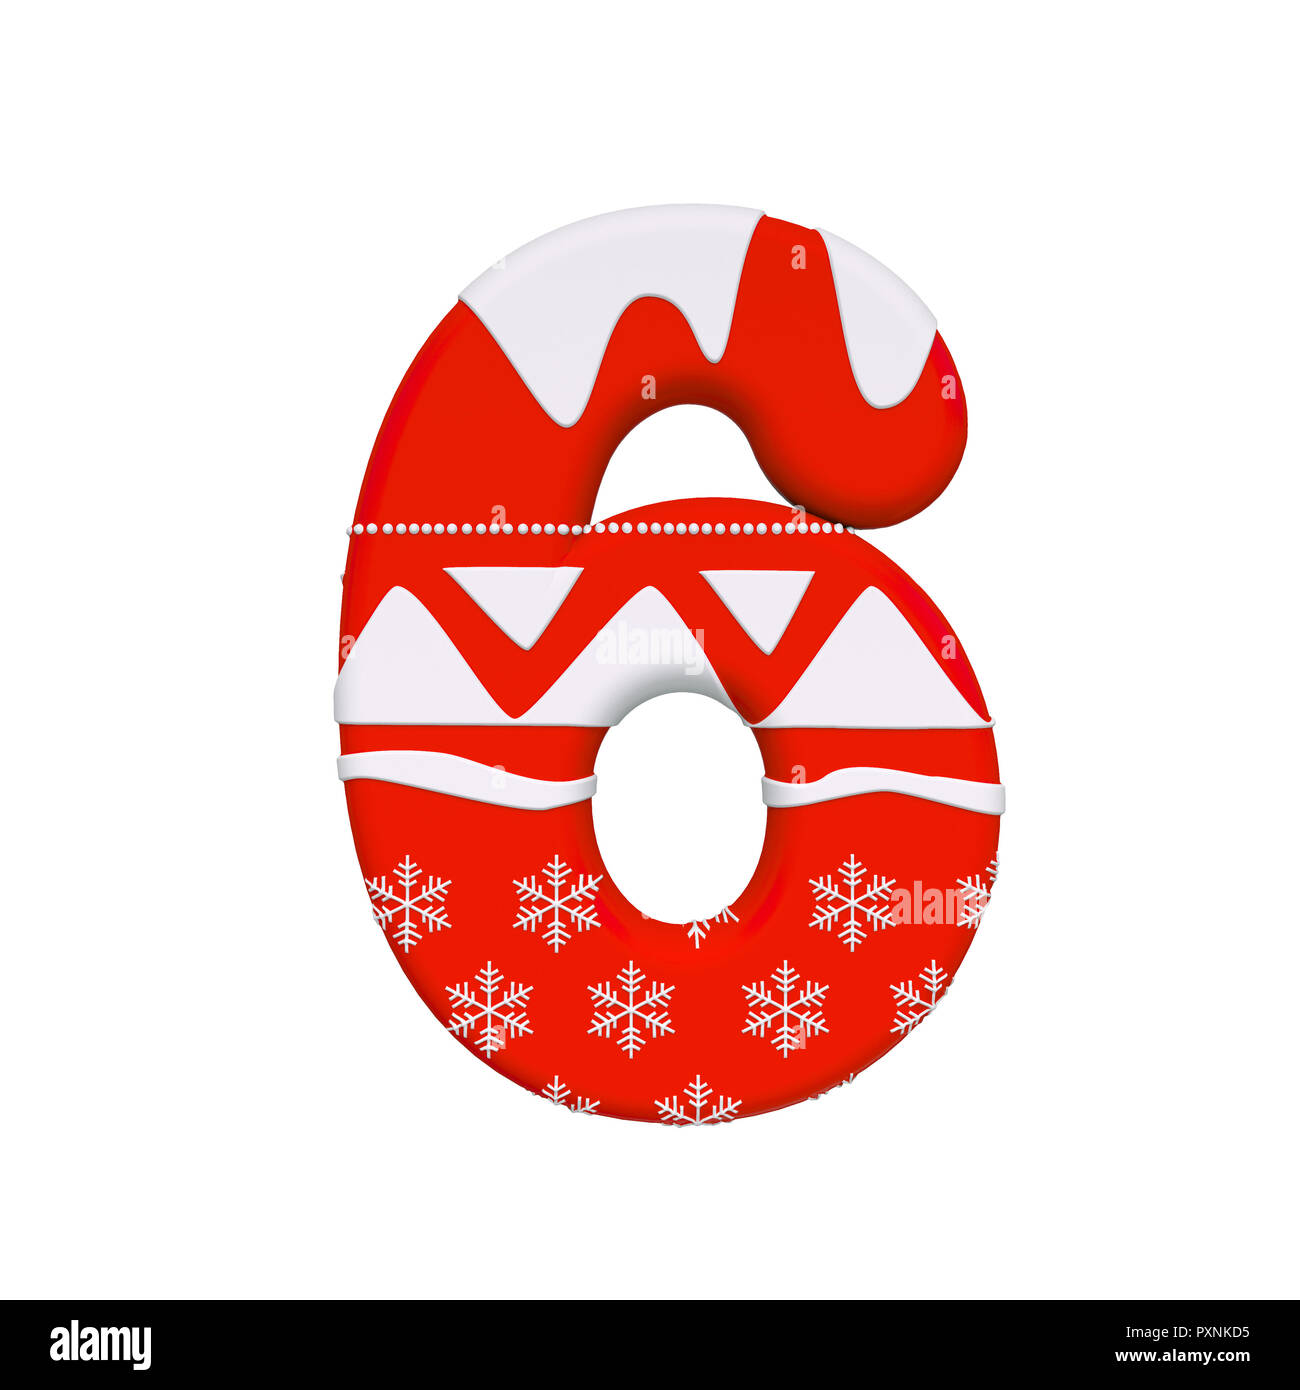 https://c8.alamy.com/comp/PXNKD5/christmas-number-6-3d-santa-xmas-digit-isolated-on-white-background-this-alphabet-is-perfect-for-creative-illustrations-related-but-not-limited-to-PXNKD5.jpg